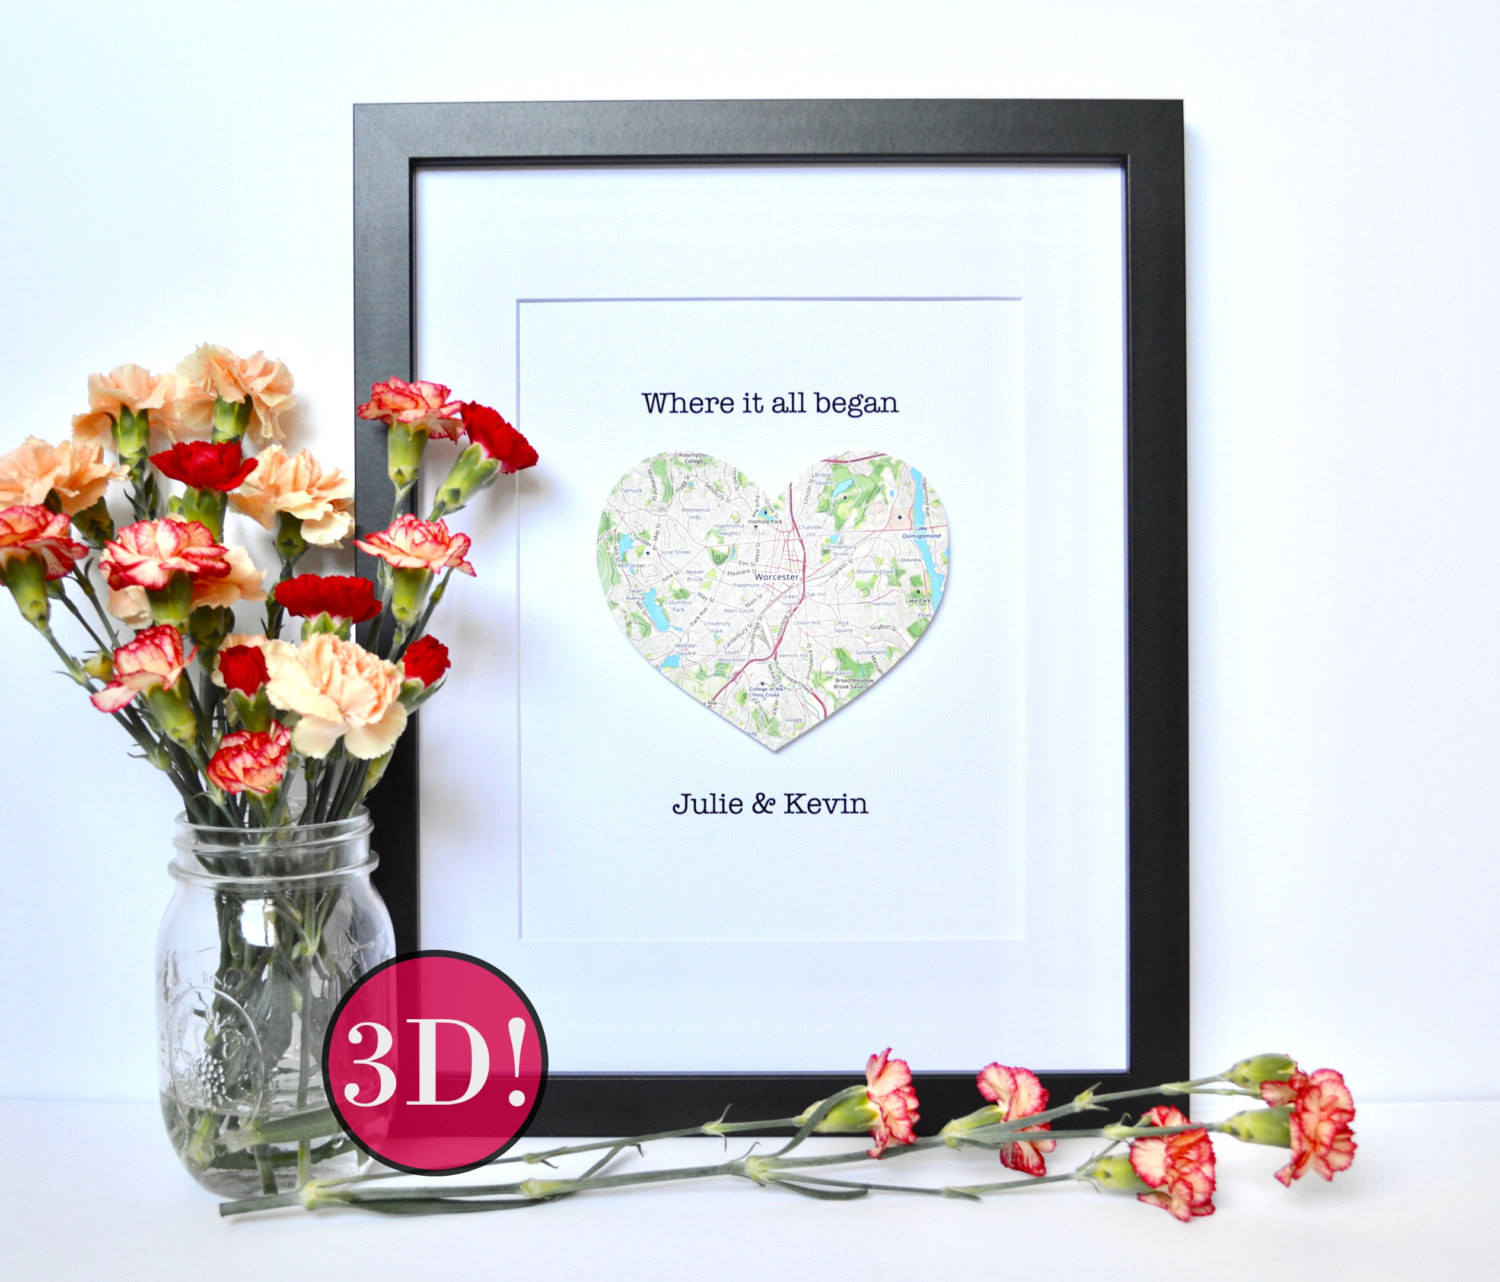 Gift Ideas For Couples Shower
 engagement t ideas for couple Bridal shower by